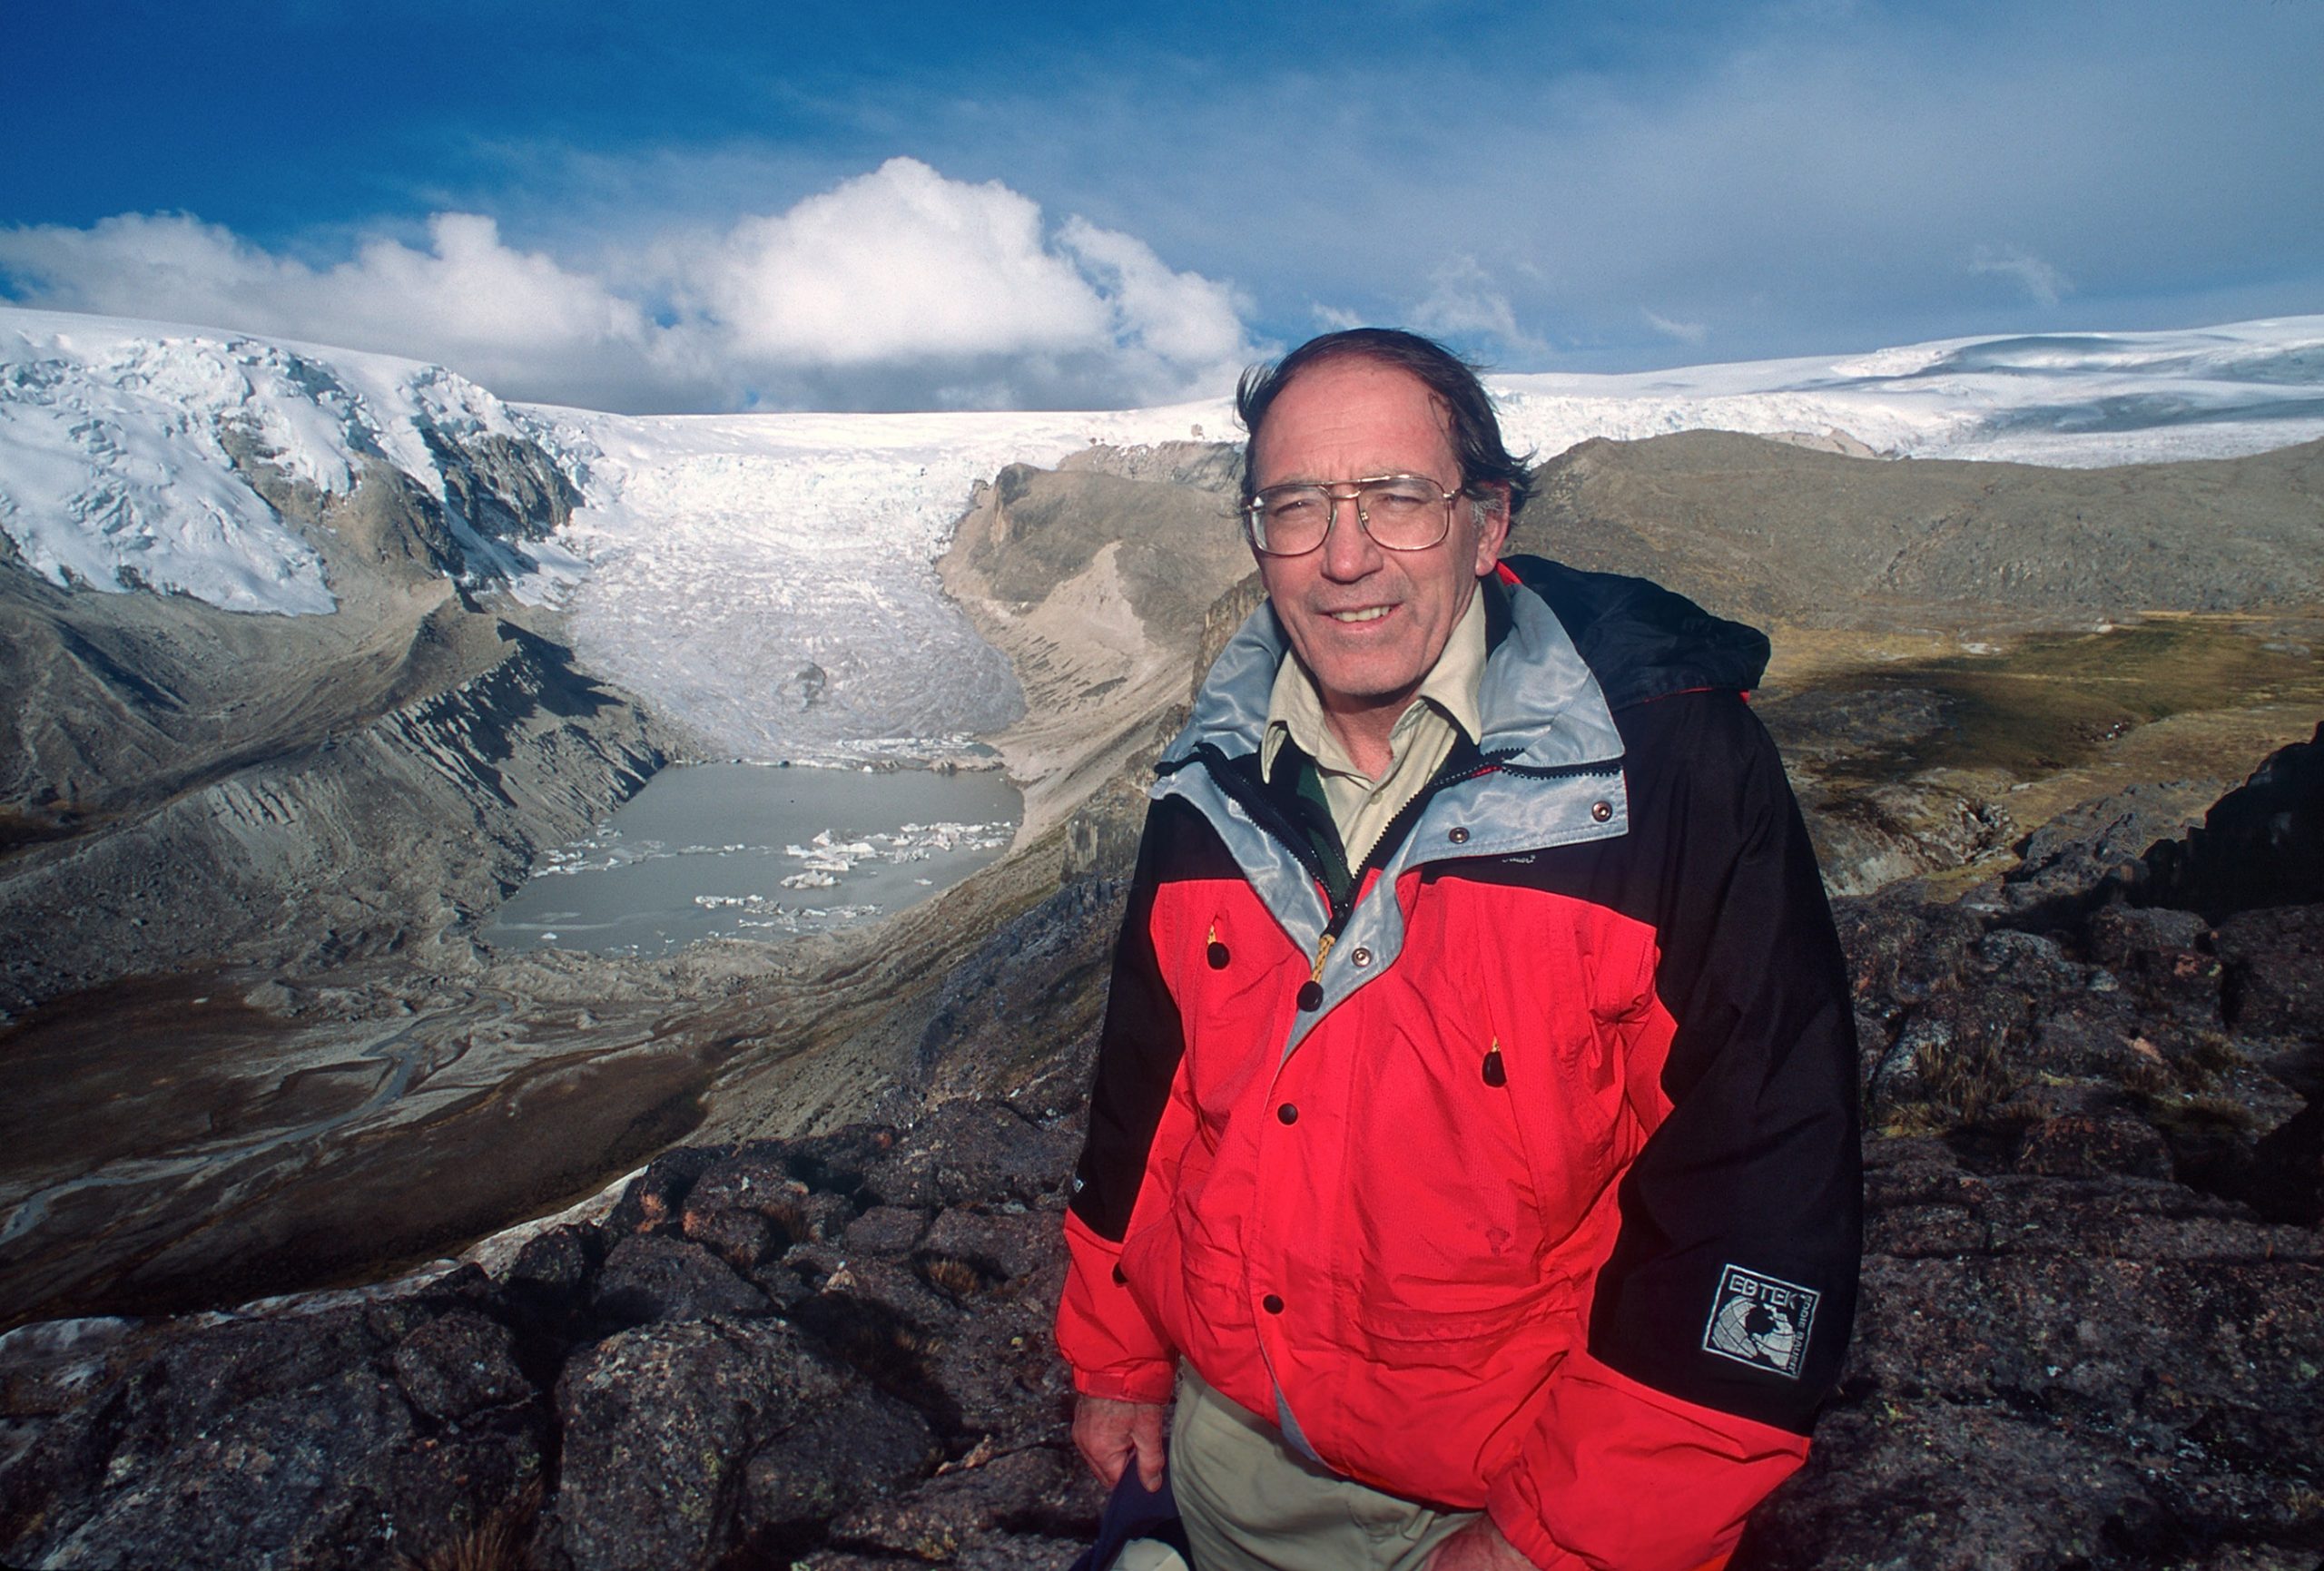 Lonnie Thompson, a scientist with the Byrd Polar Research Center, is shown here in 2000 with Peru's Qori Kalis Glacier in the background. Qori Kalis is the largest outlet glacier from the Quelccaya Ice Cap in the southern Andes of Peru. Thompson will deliver a Frontiers of Science lecture about glaciers, icecaps and climate change on April 14 at the University of Utah.